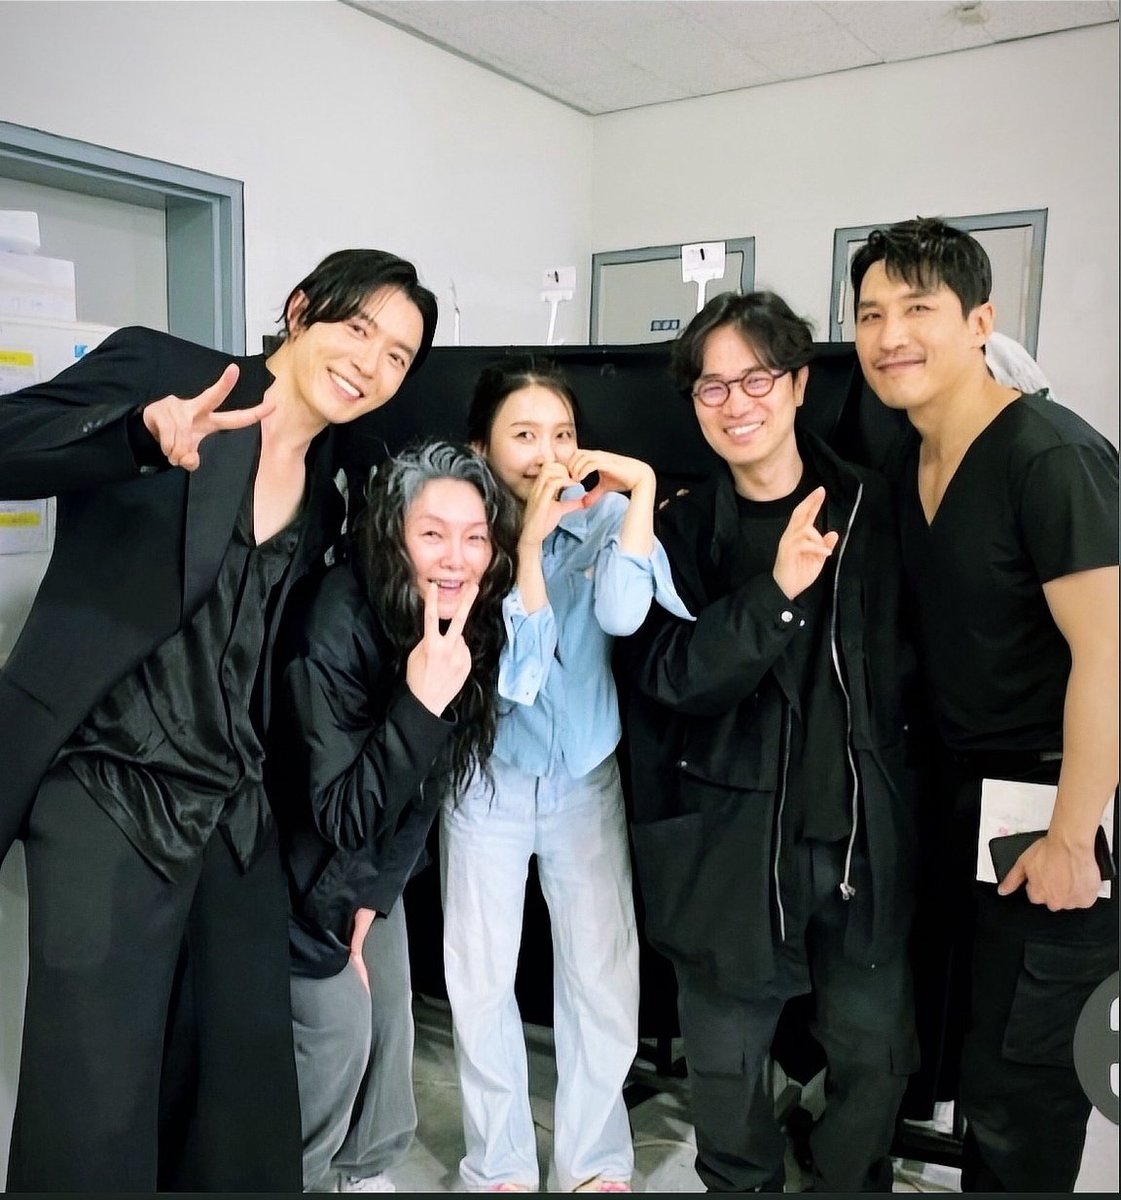 The director of pagwa movie came to watch musical pagwa #kimjaewook #kimjaeuck #jaeuck #kimjaeuck #jaewook #jaeuck #jaewookkim #jaeuckkim #キムジェウク #DeathsGame #minsunwoo #김재욱  #pagwa #damagedfruit